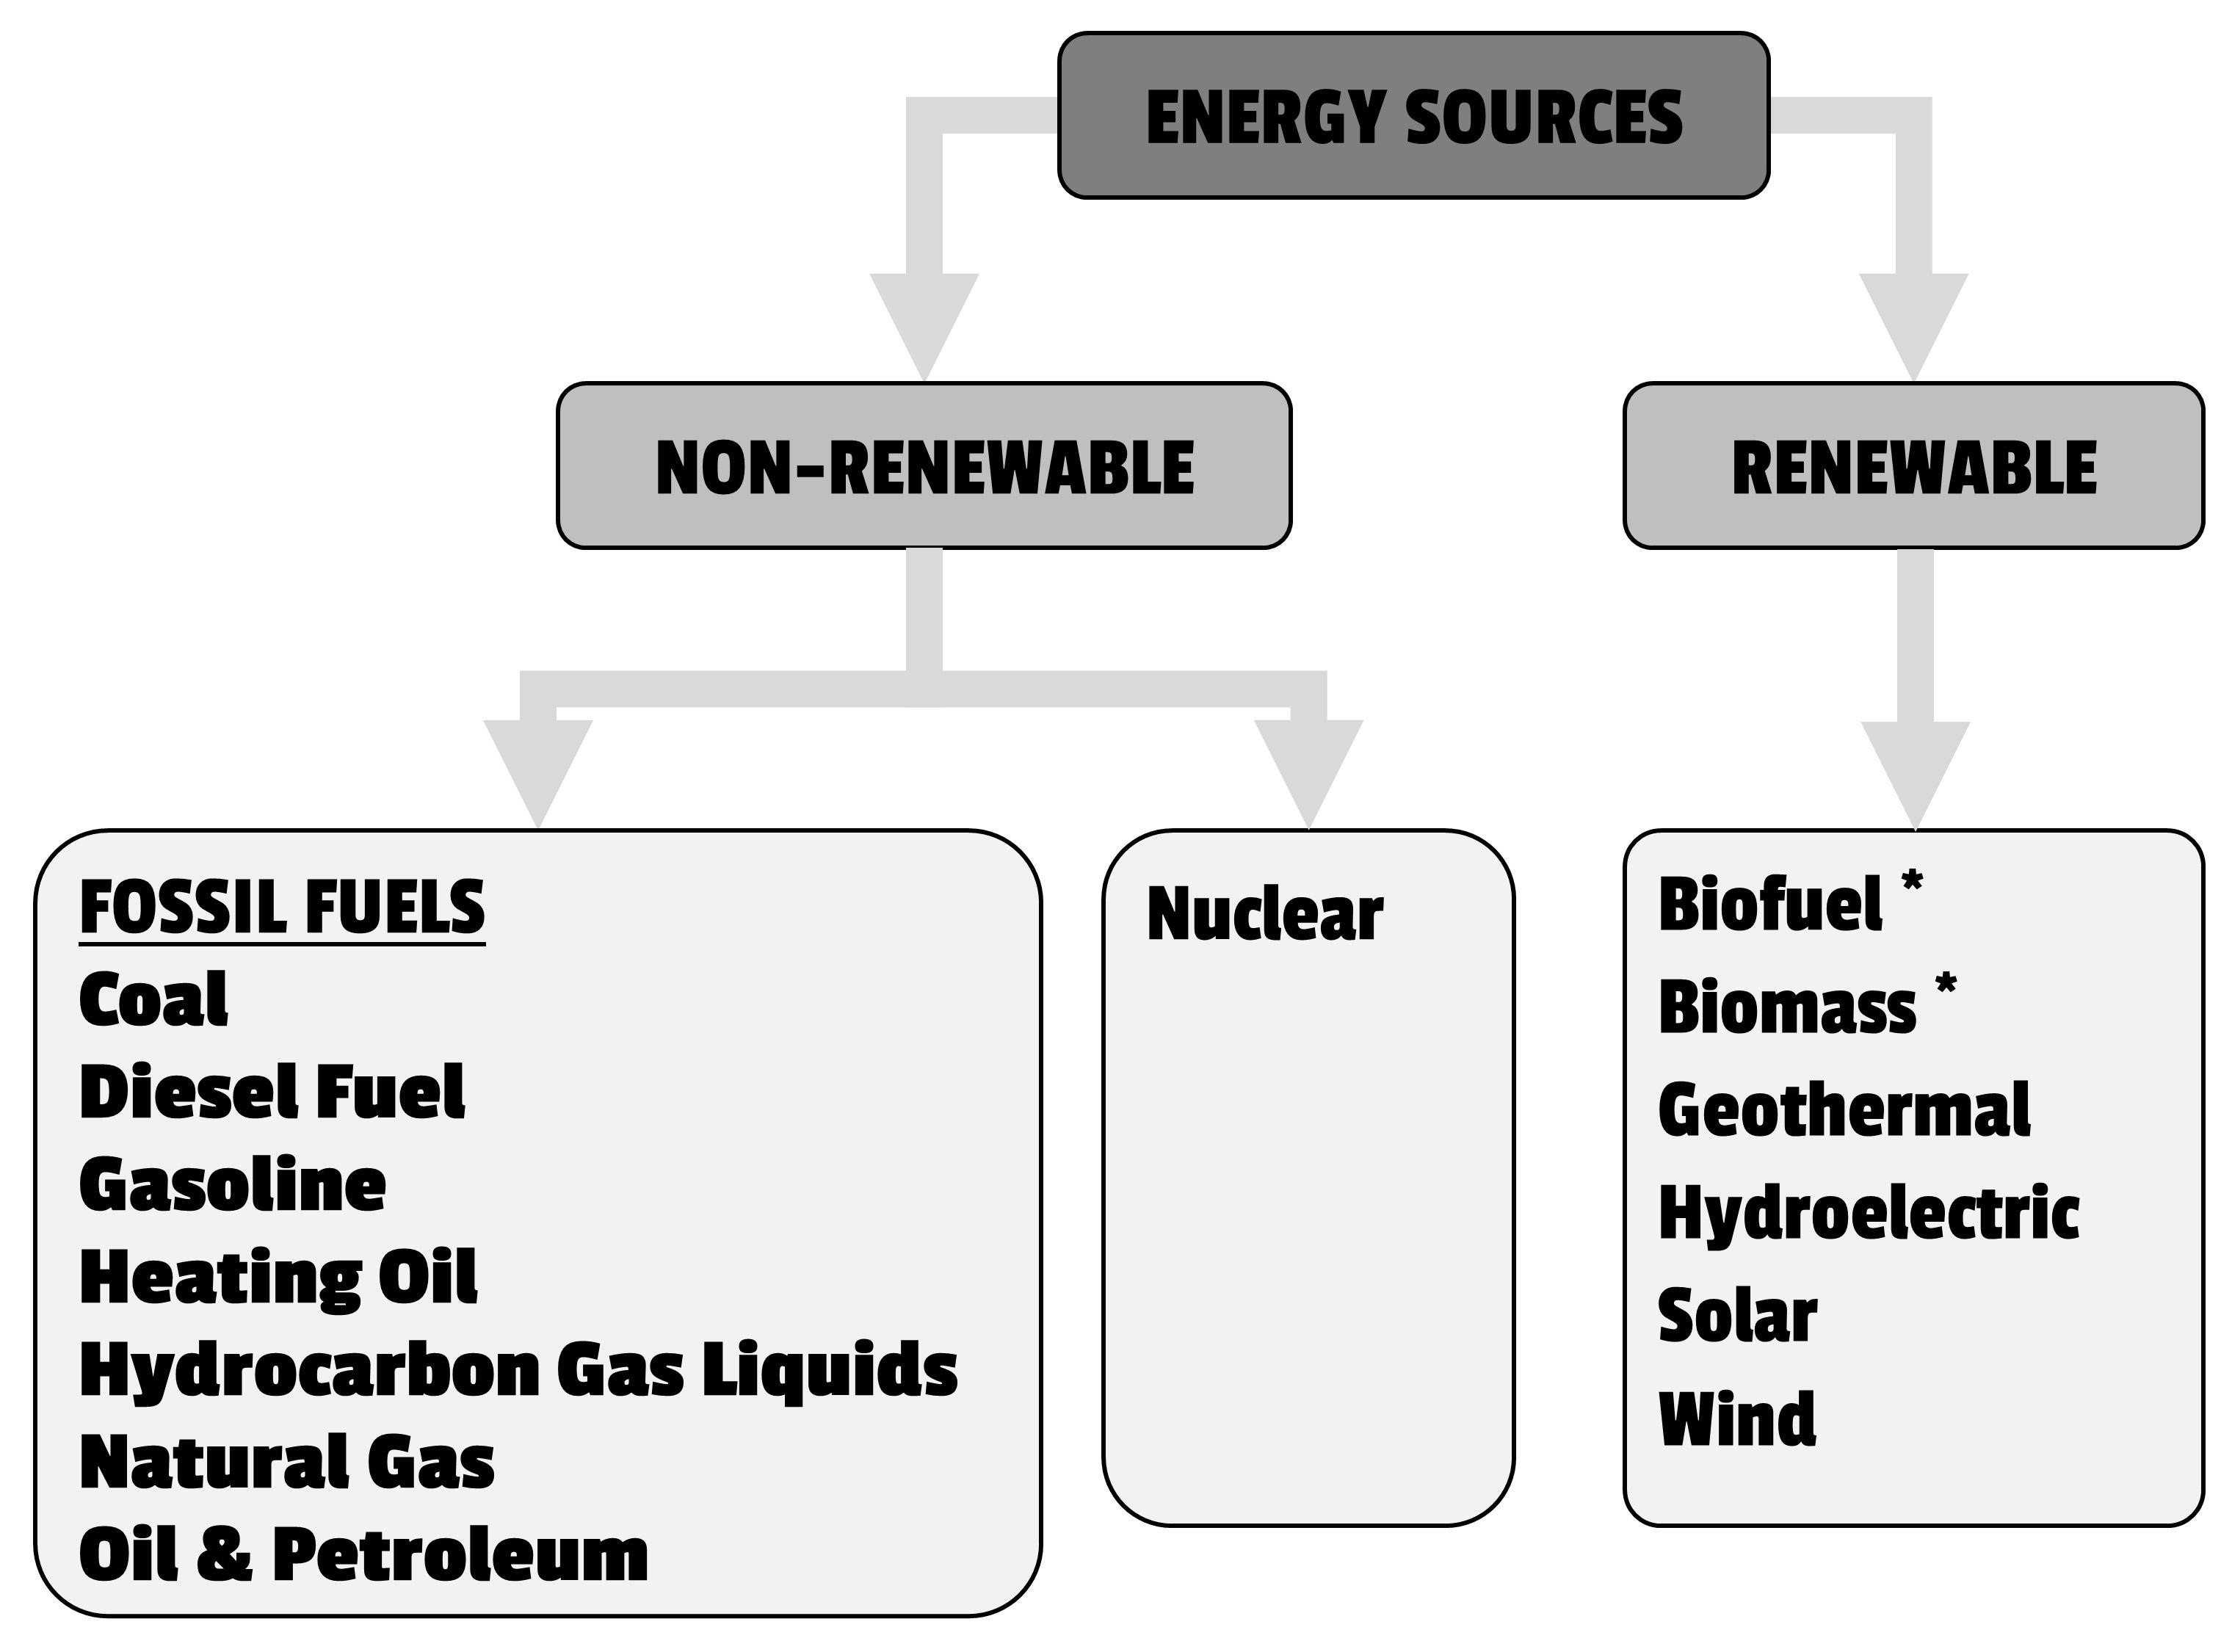 Figure 1. Flow chart showing the different types of energy resources *Biomass and biofuel may be renewable sources depending on various factors. Biomass, and its biofuel derivatives, may be considered renewable because its inherent energy comes from the sun and can be regrown in a relatively short timeframe. However, biomass can also be a non-renewable energy source if the biomass feedstocks are not replenished as quickly as they are used. A forest, for instance, could take hundreds of years to re-establish